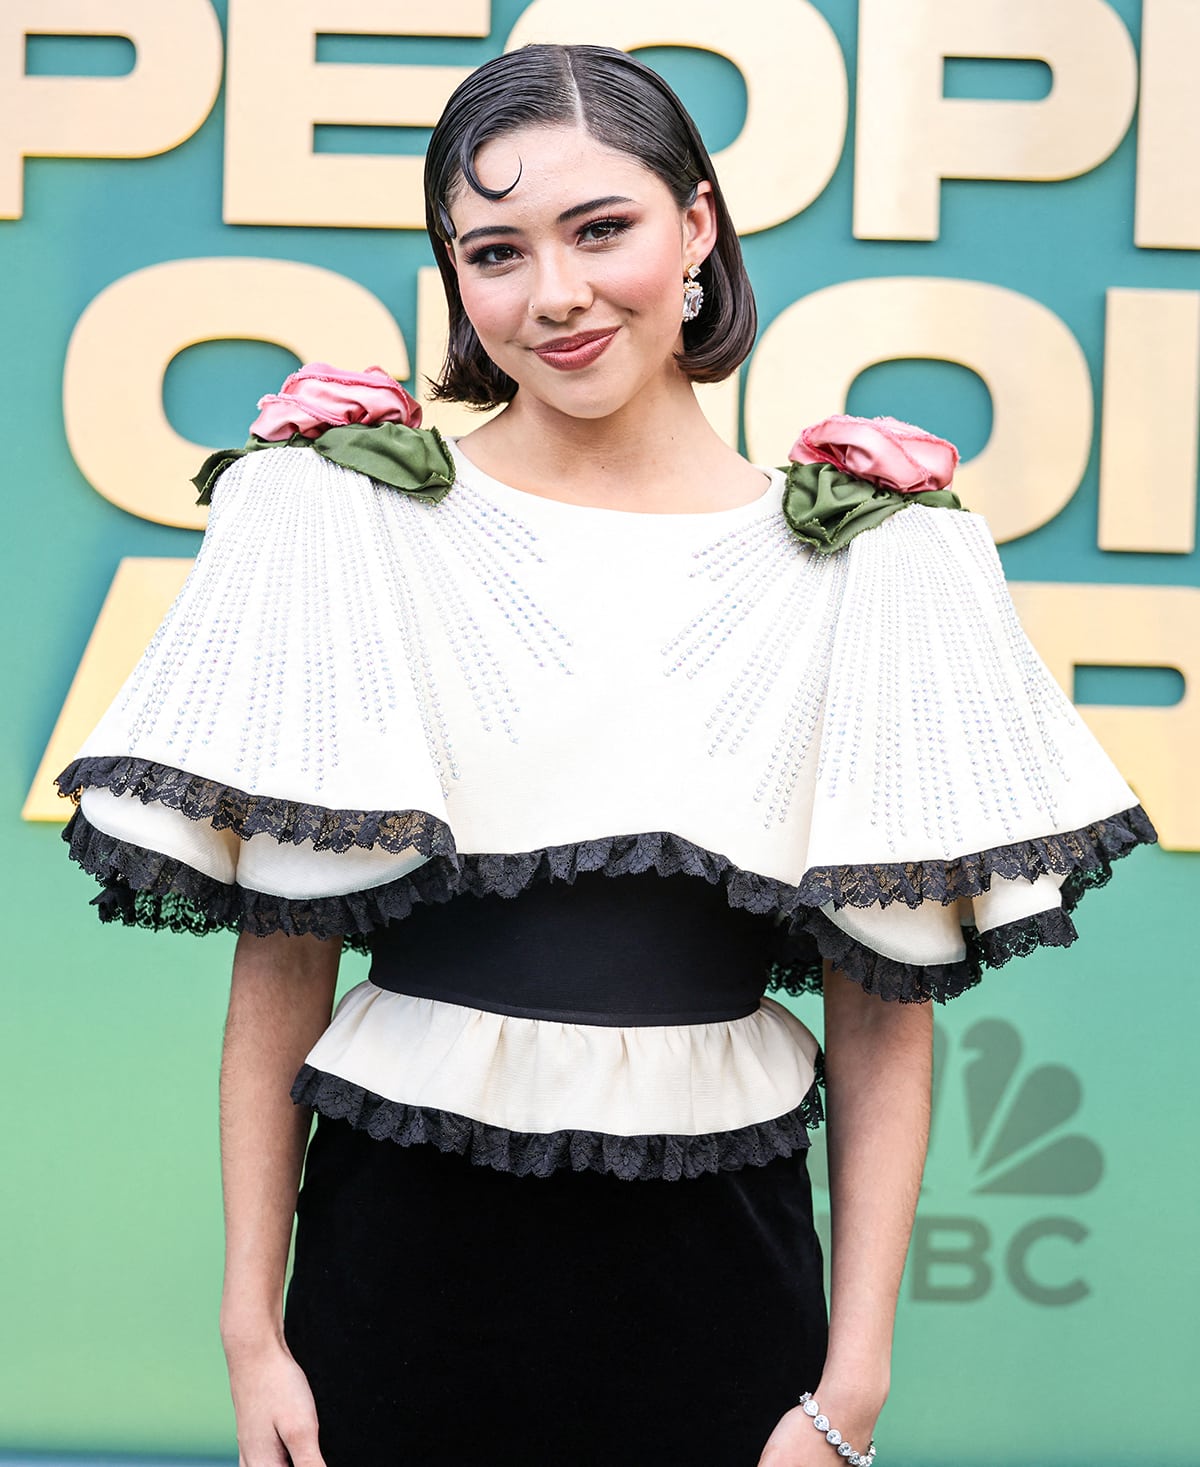 Xochitl Gomez's black and white Gucci dress features flouncy sleeves with pink and green flower corsages on the shoulders